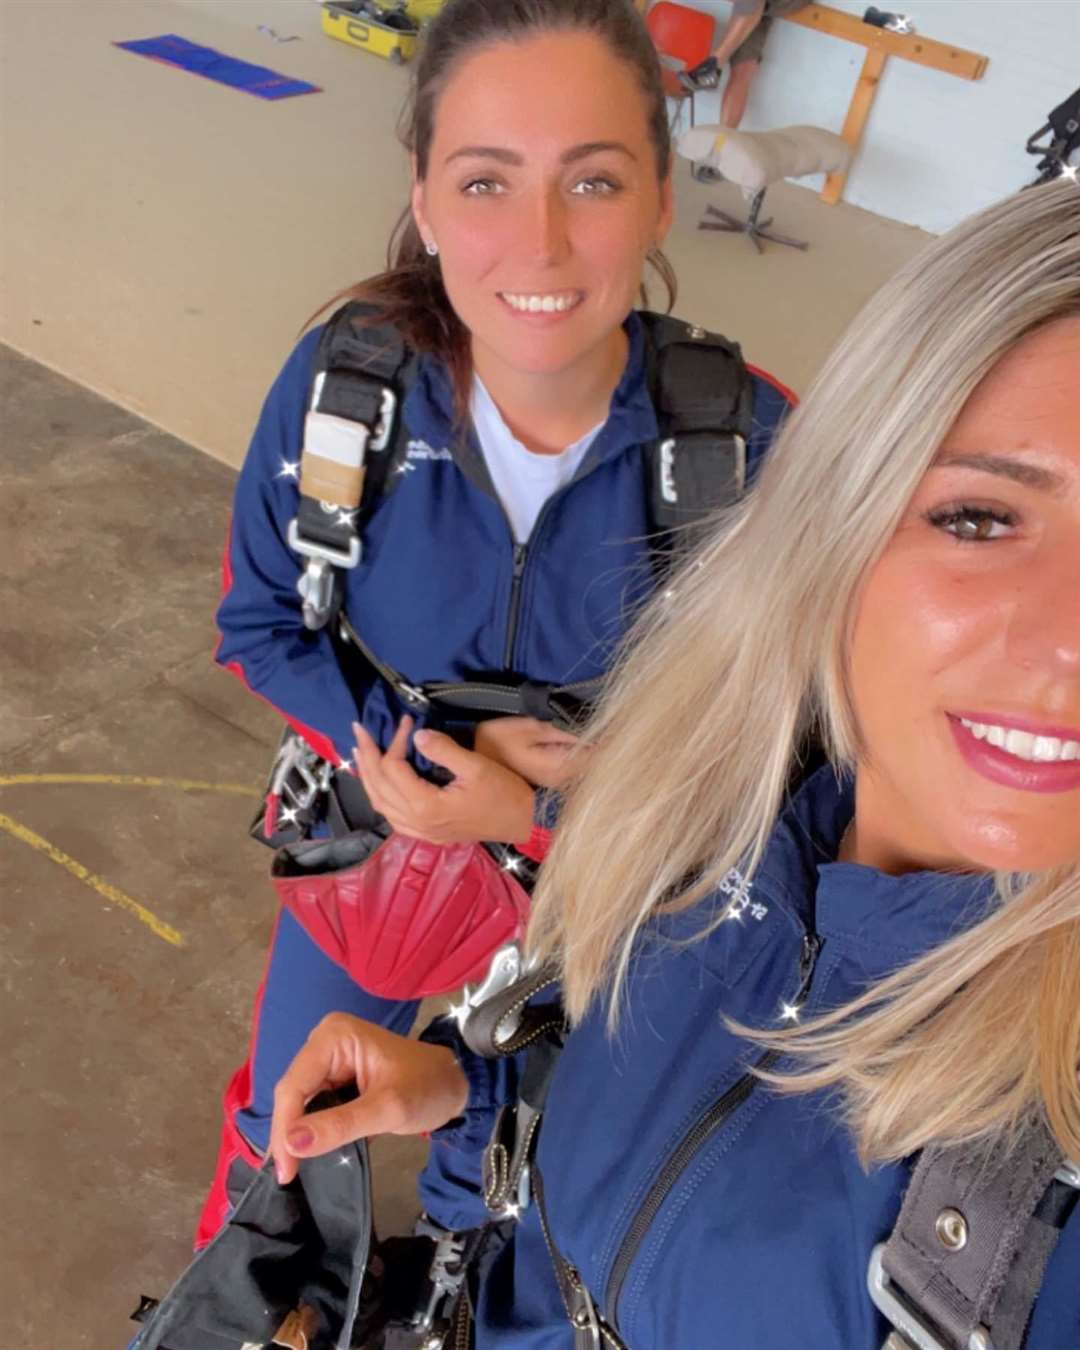 Inverness twins Eilidh and Kirsty have completed a charity skydive in memory of their late brother Ryan Mackenzie.